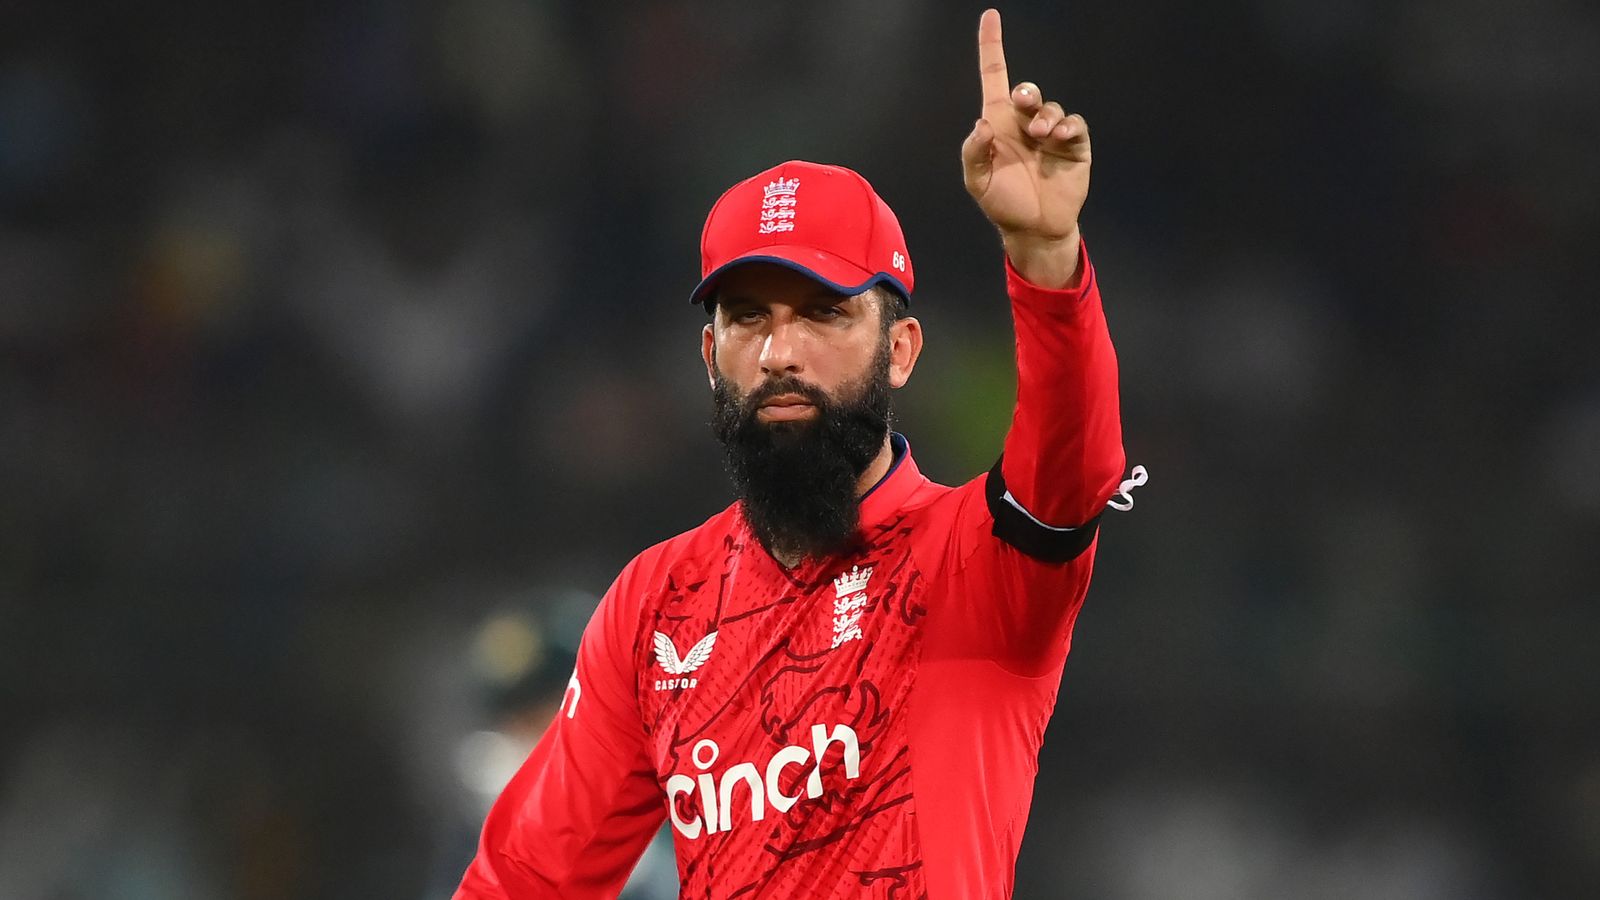 Pakistan vs England: Moeen Ali admits one-over 'gamble' on his own off-spin failed in second T20I